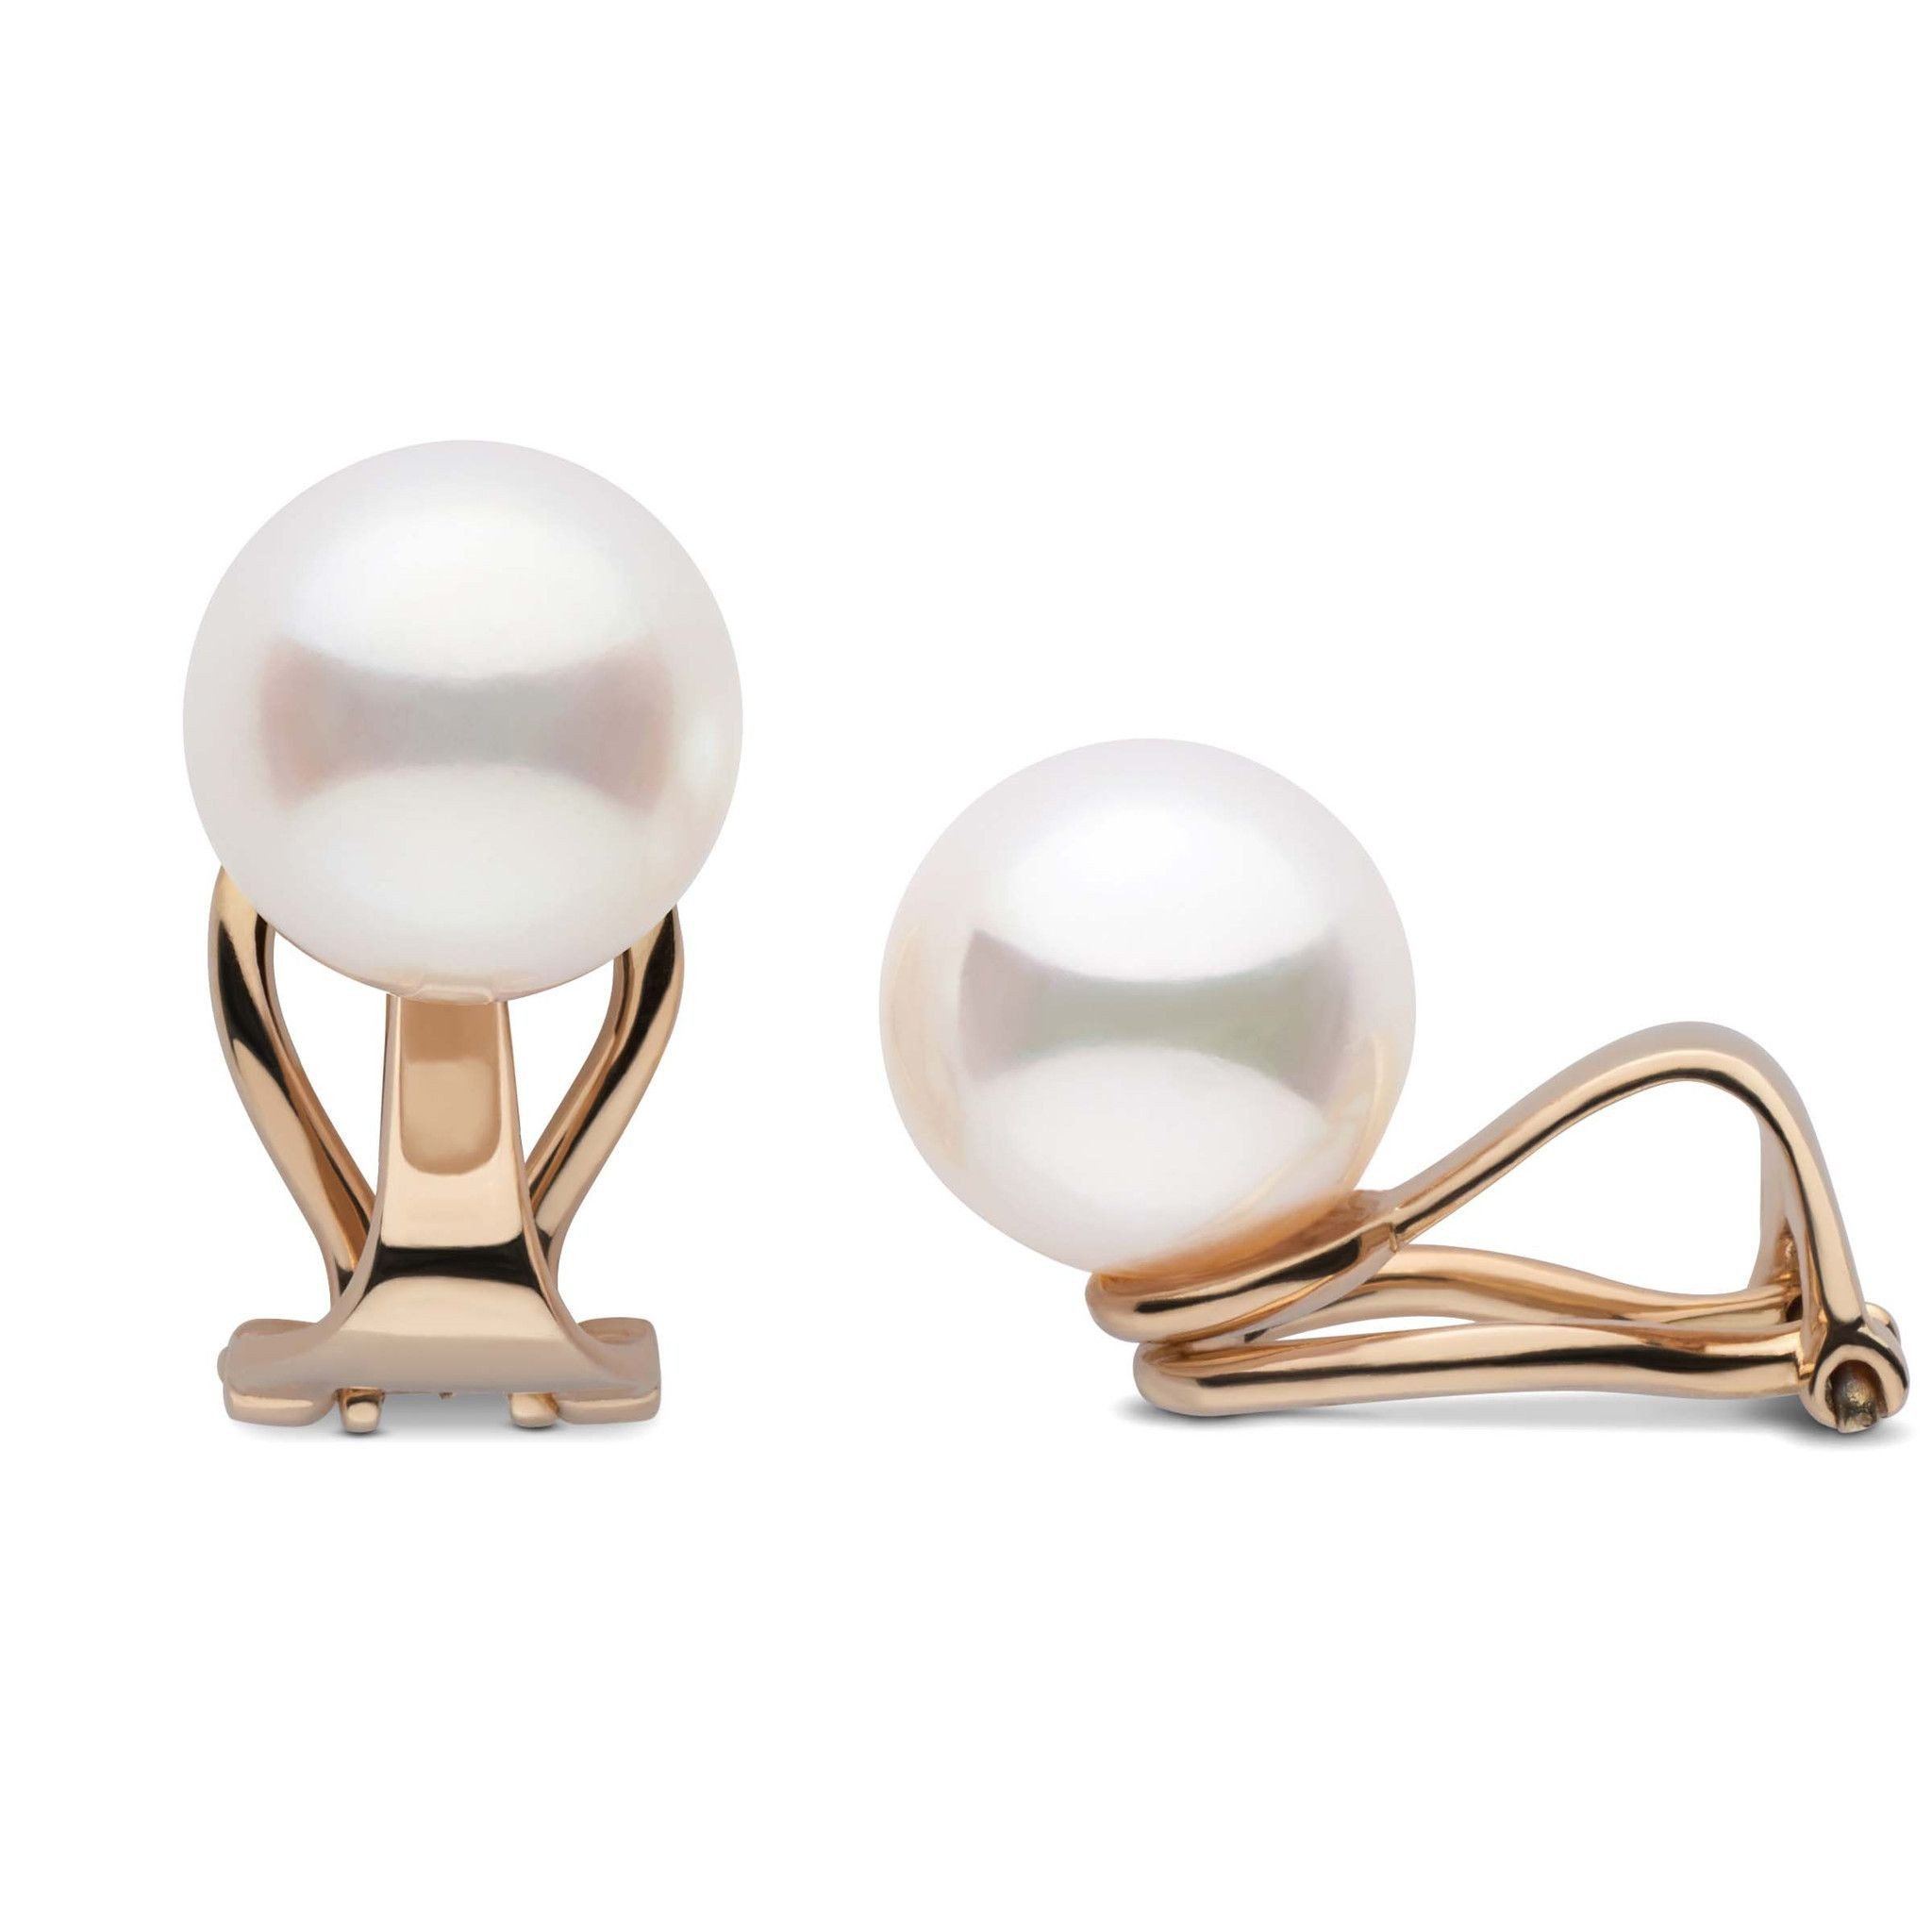 Freshadama freshwater 10.0-10.5 mm Clip-on Pearl Earrings for non-pierced ears in yellow gold